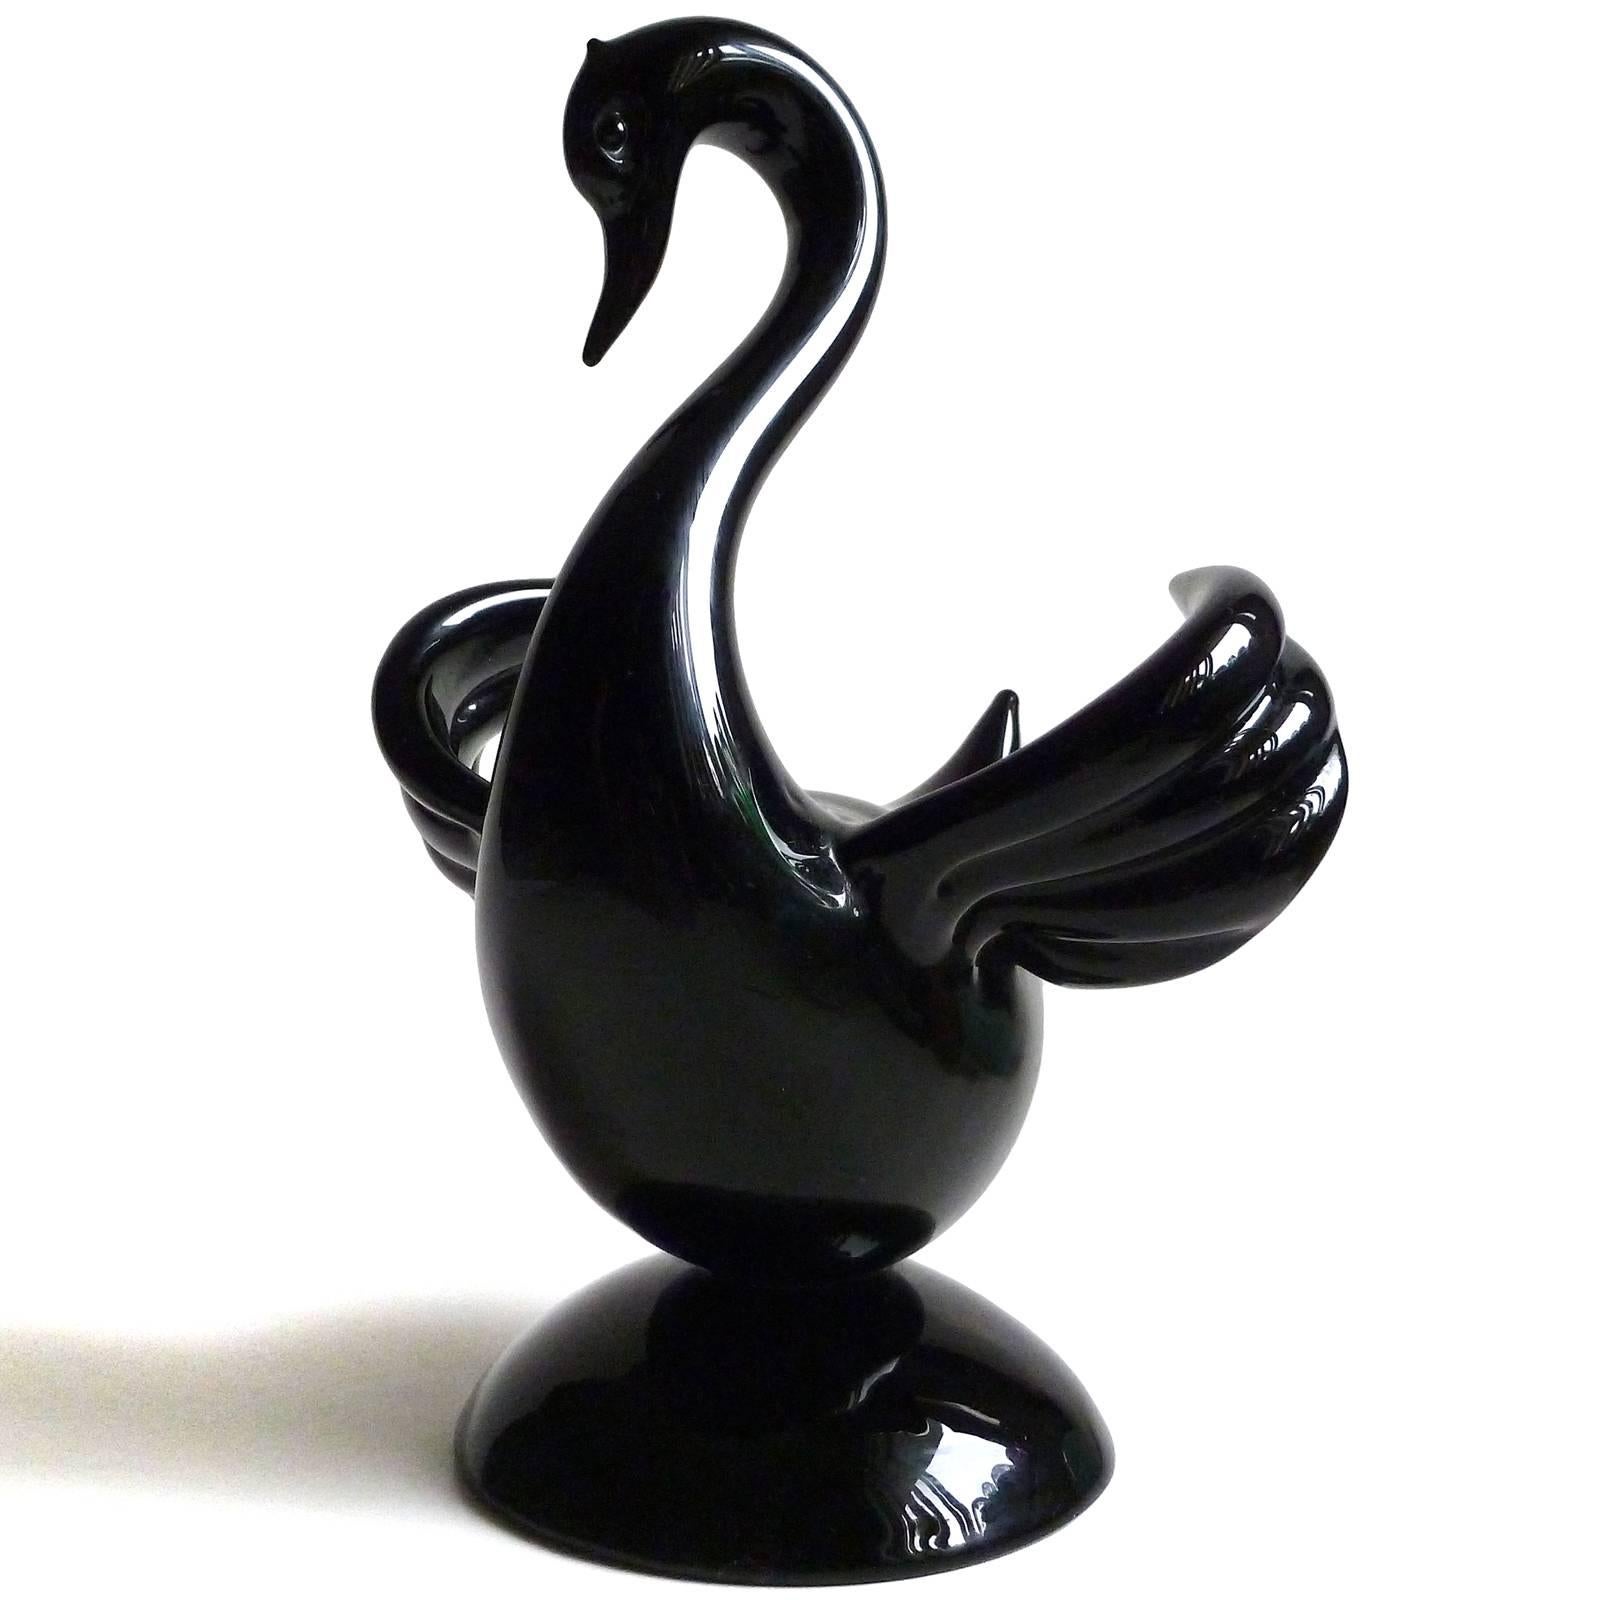 Free shipping worldwide! See details below description.

Gorgeous Murano handblown art glass black swan figurine with original label. Documented to designer Archimede Seguso Murano, circa 1950s. The bird has beautiful elegant lines, with 